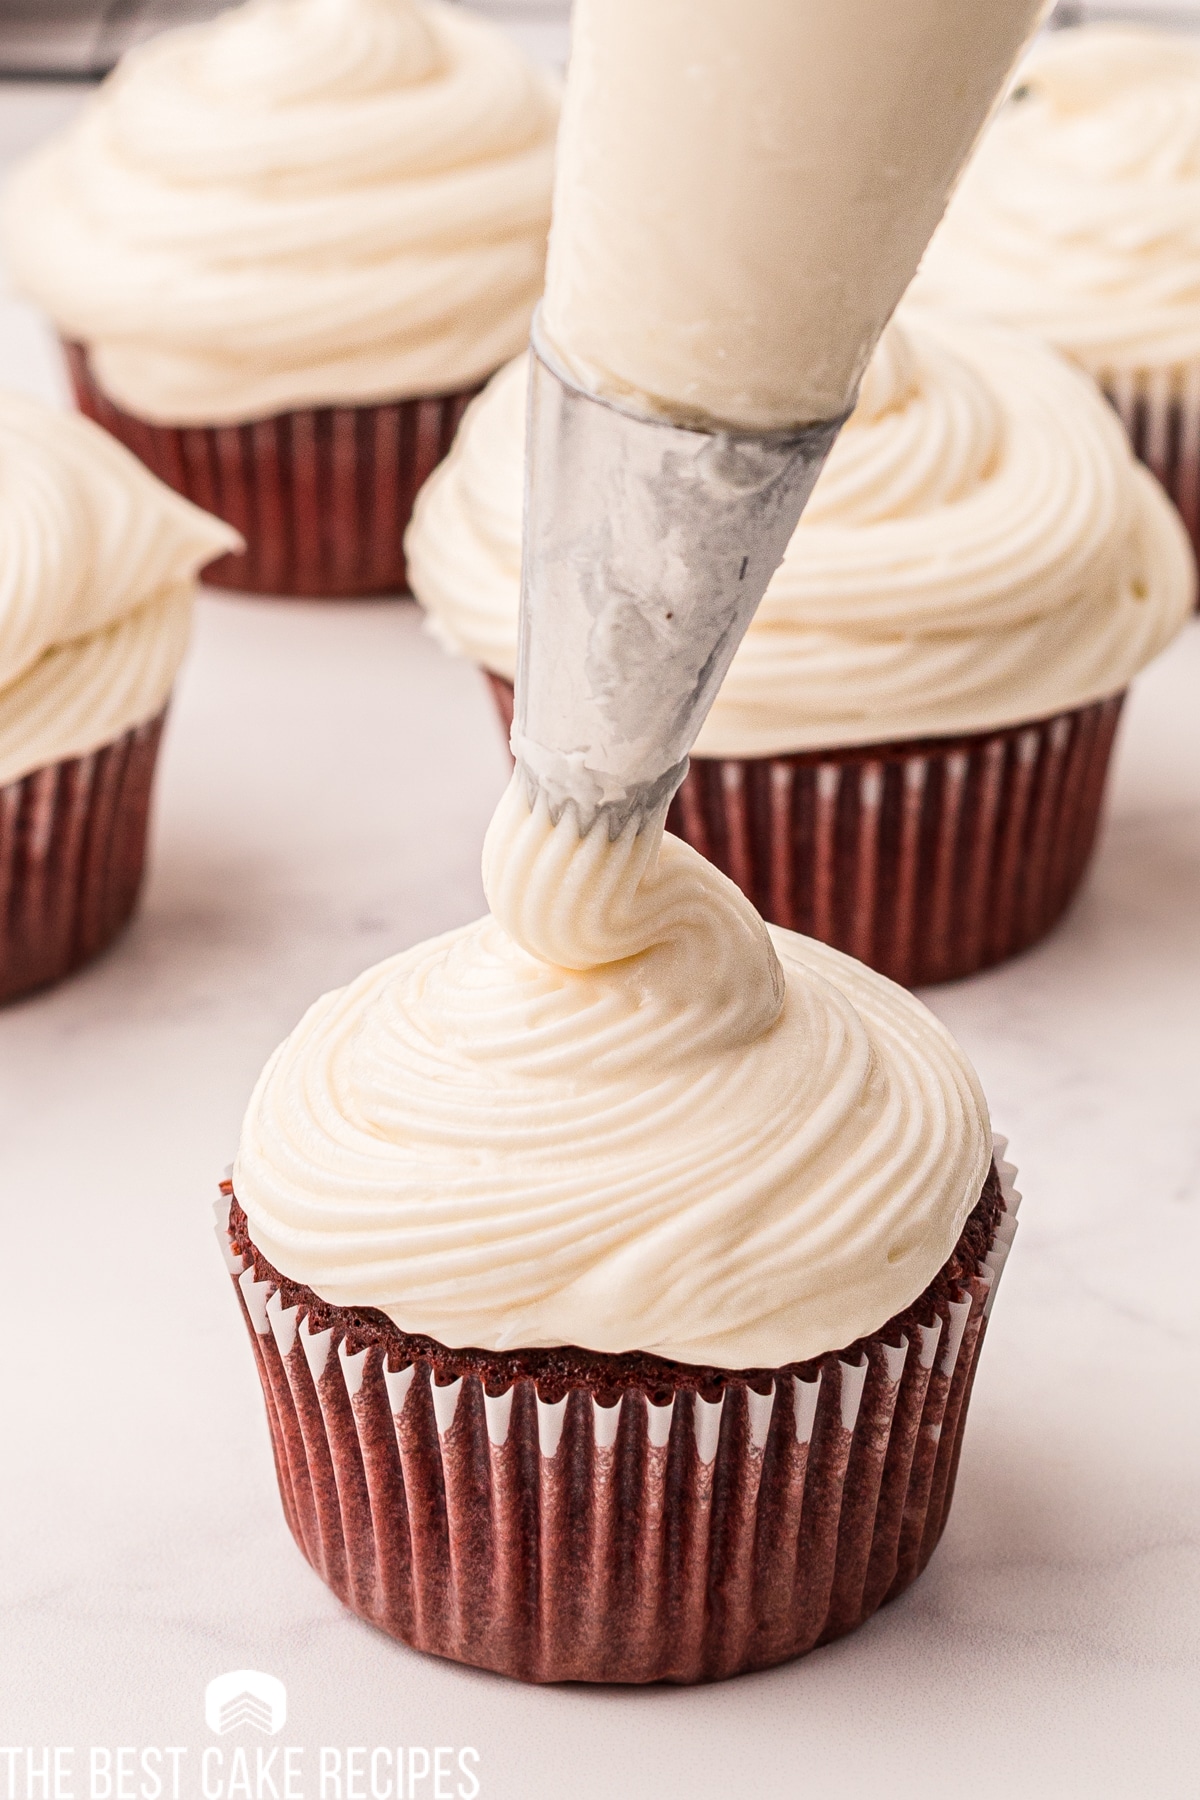 Extra Creamy Cream Cheese Frosting | The Best Cake Recipes